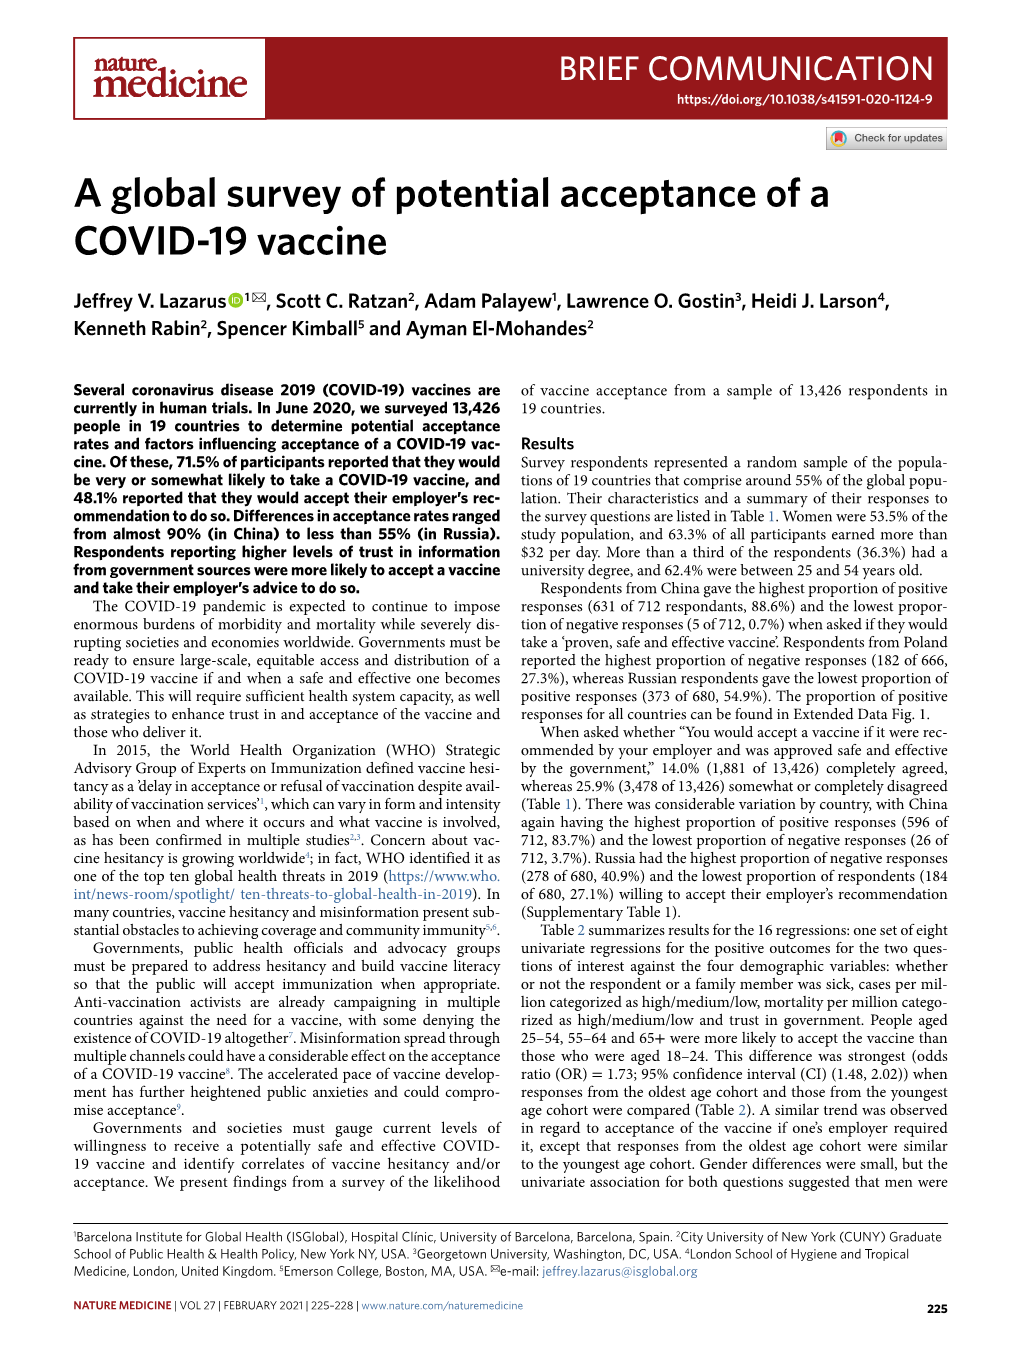 A Global Survey of Potential Acceptance of a COVID-19 Vaccine